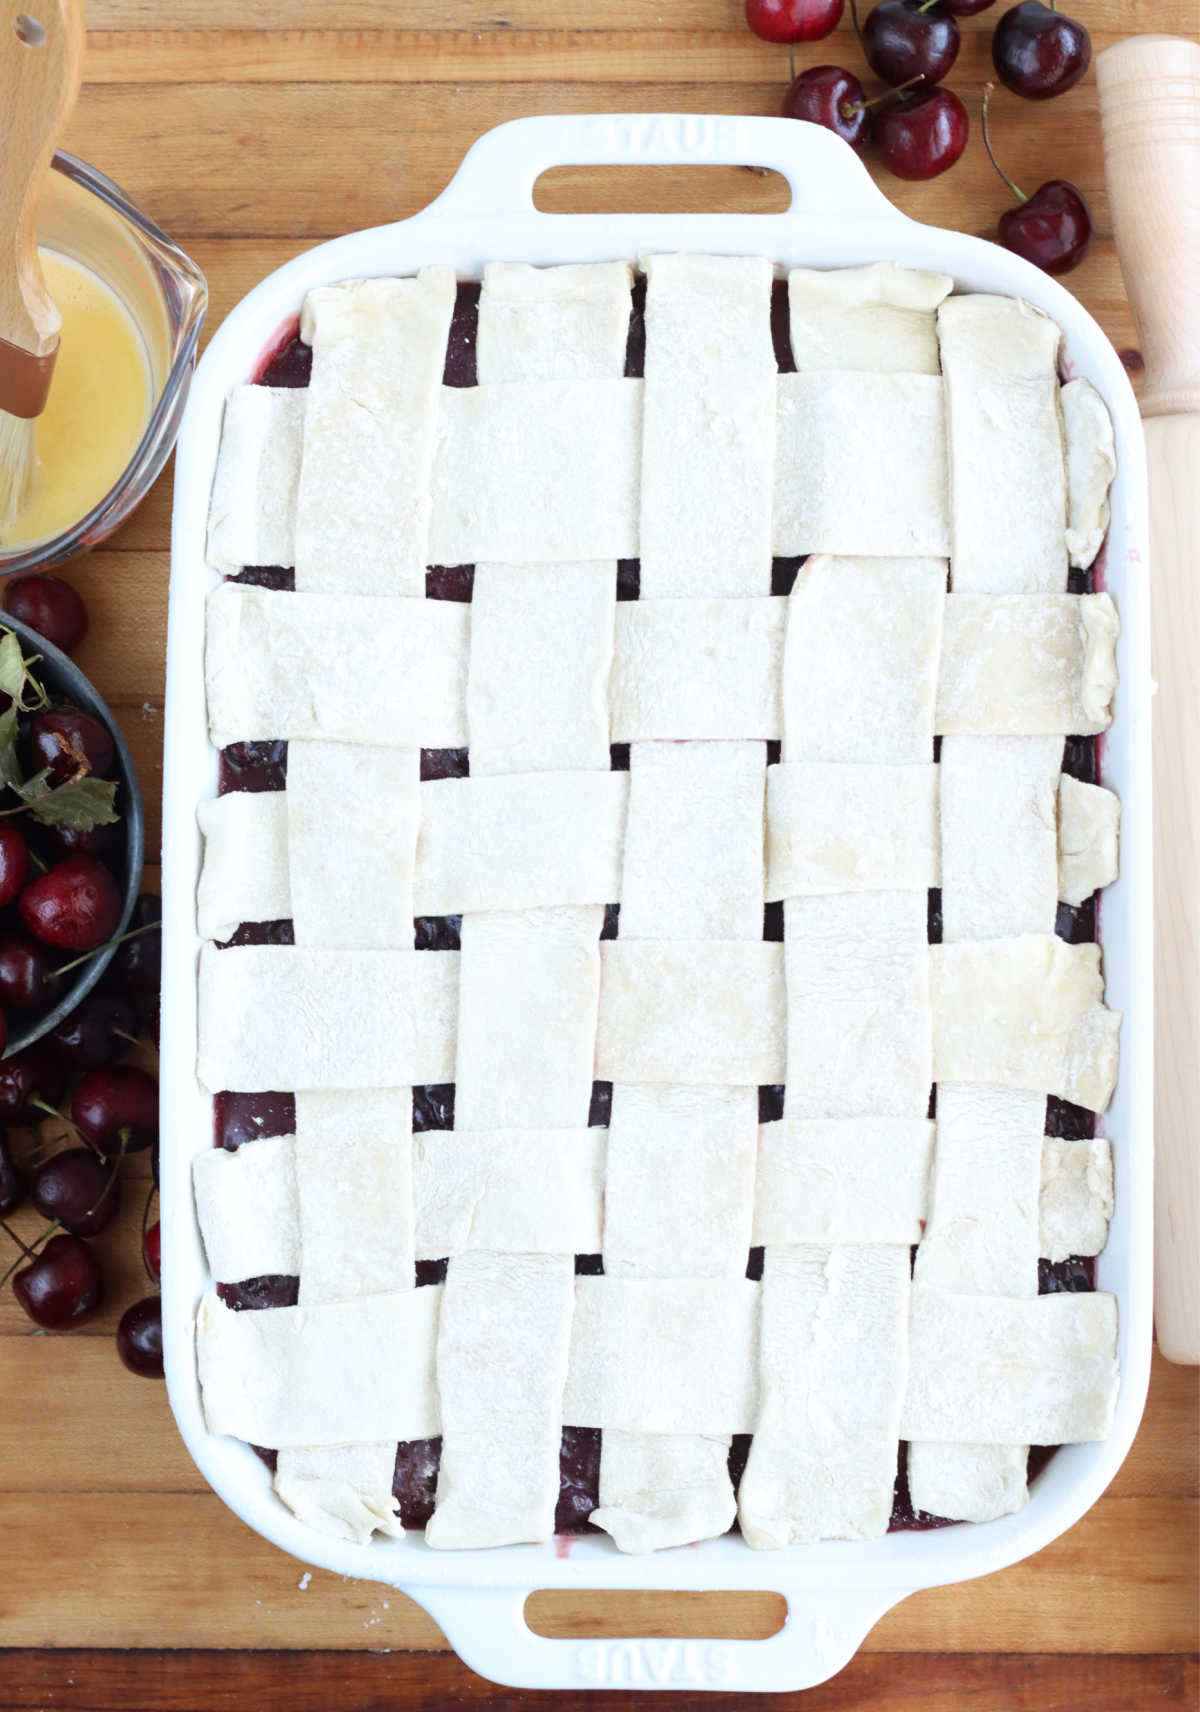 Cobbler with lattice pie crust in white rectangle baking dish, fresh cherries and egg wash to left.